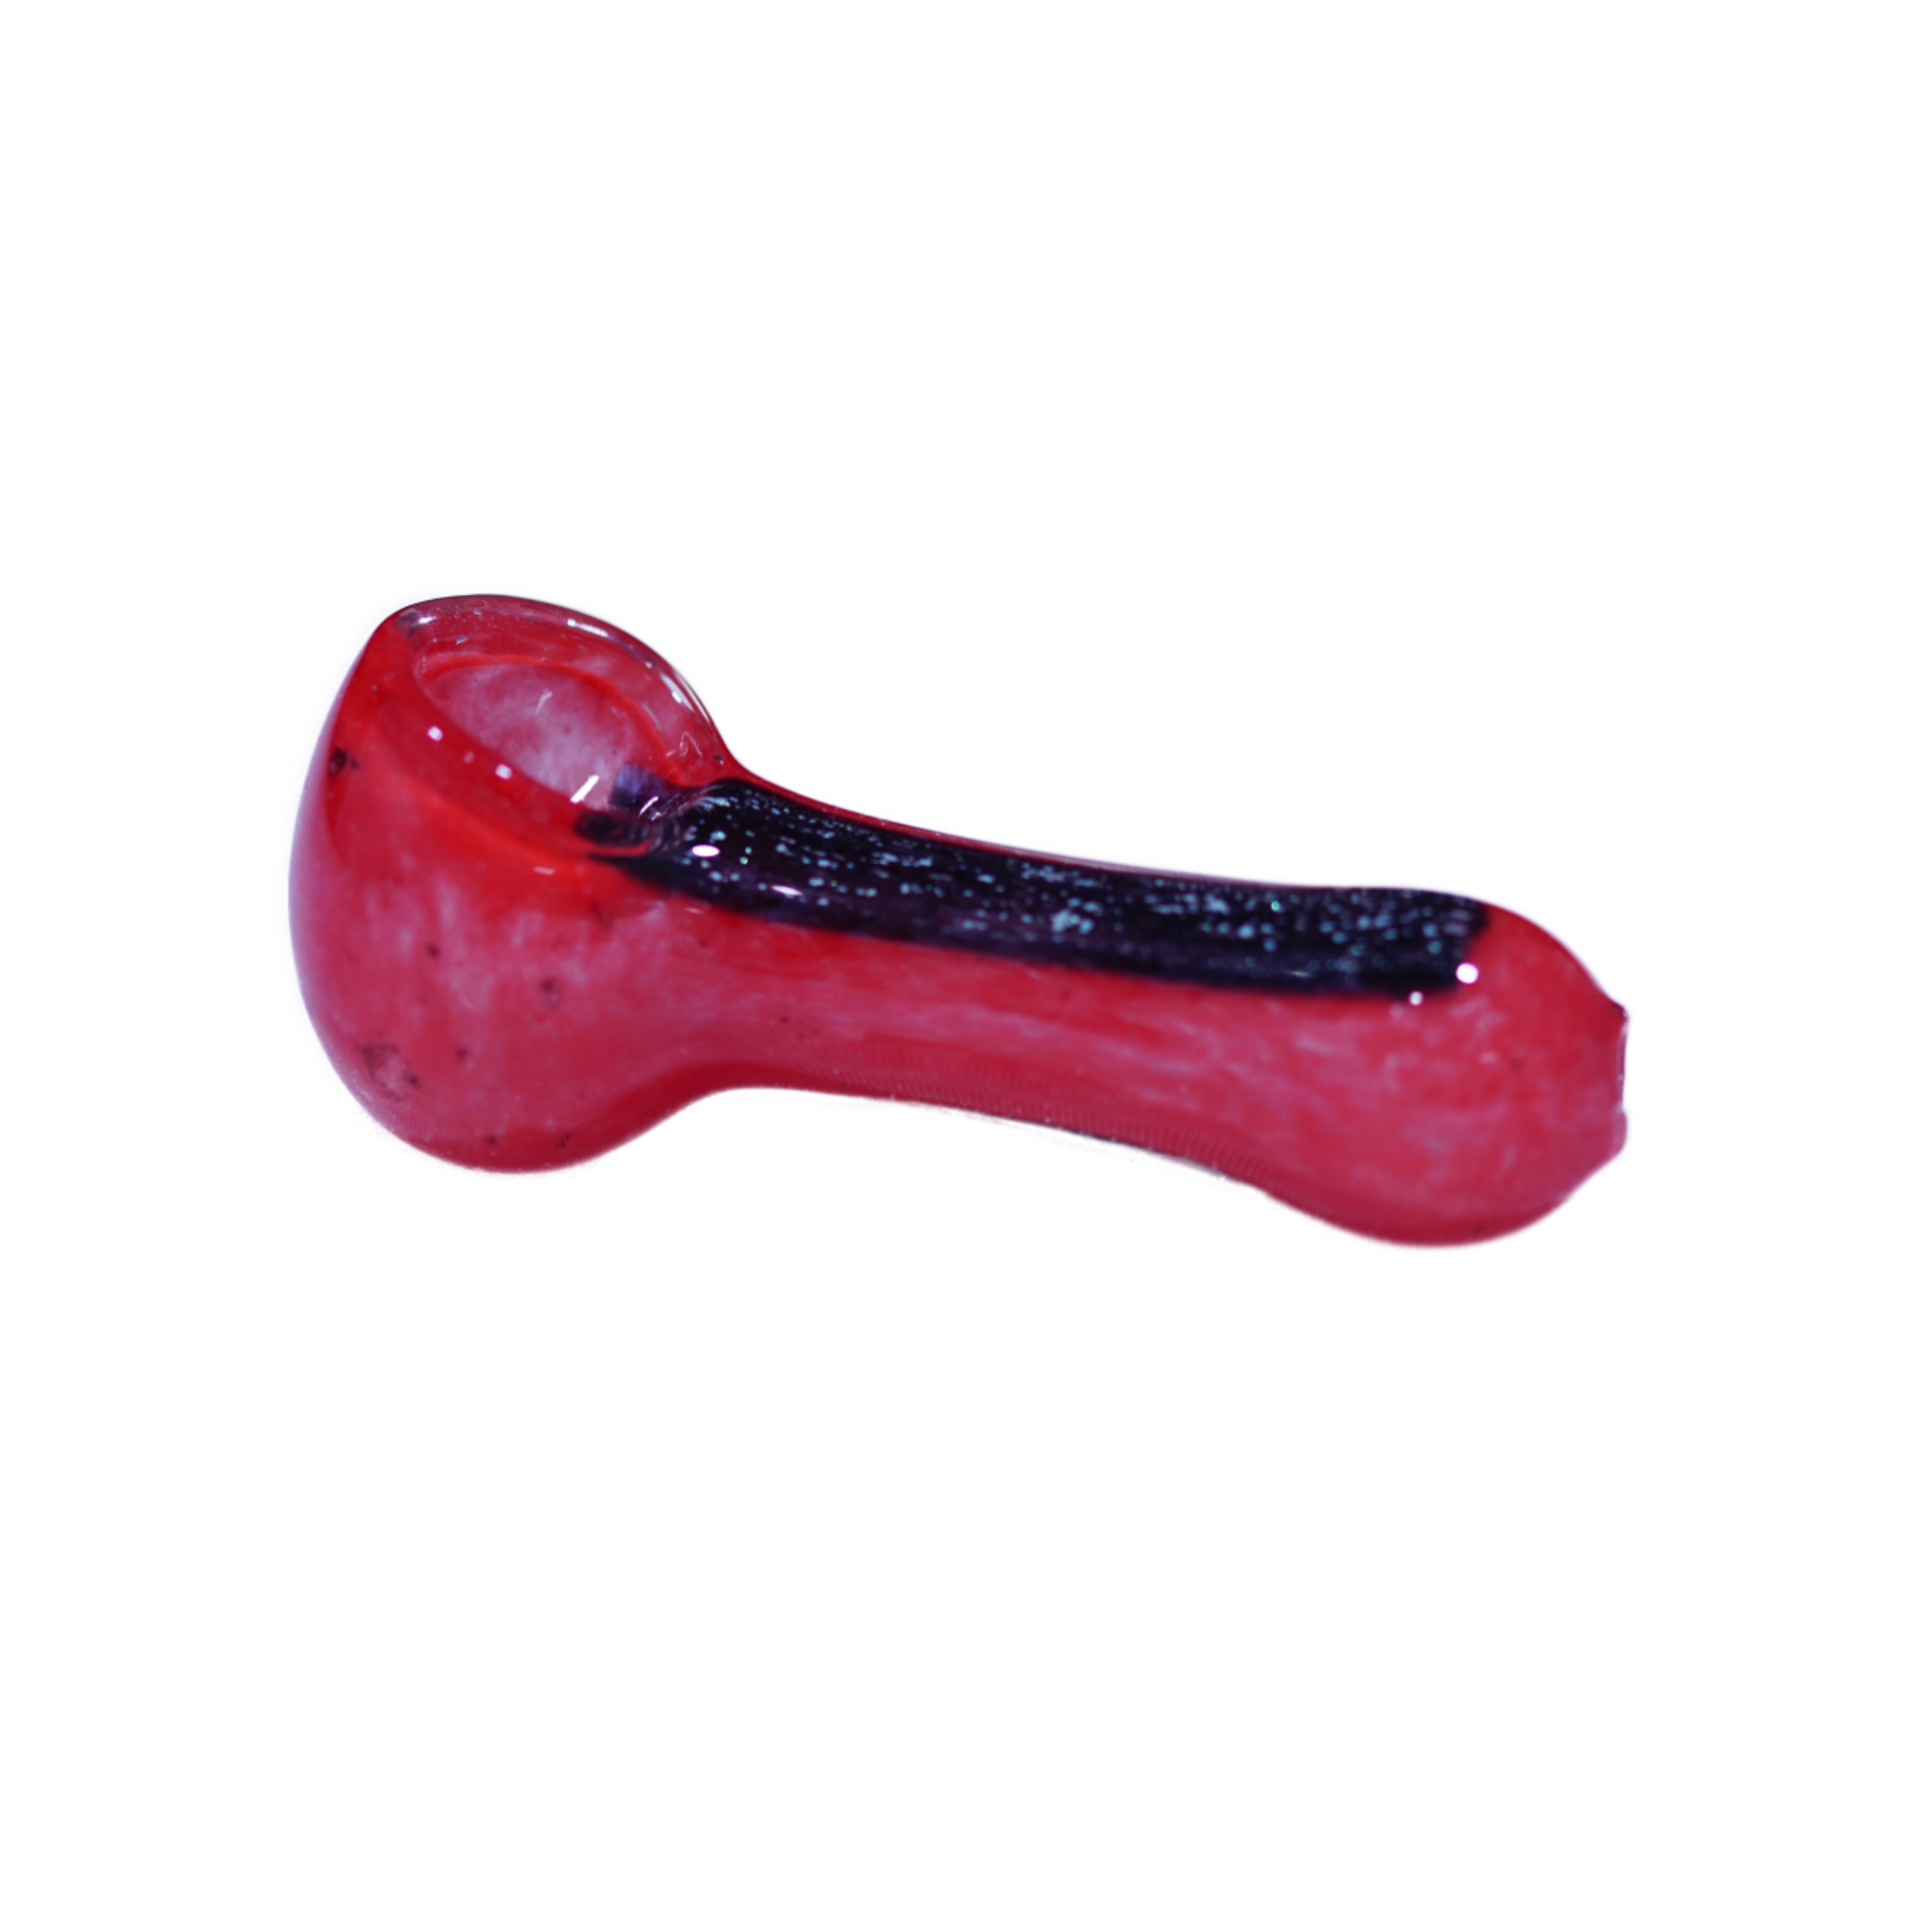 2.5" Dicro Hand Pipe, 1 of 1